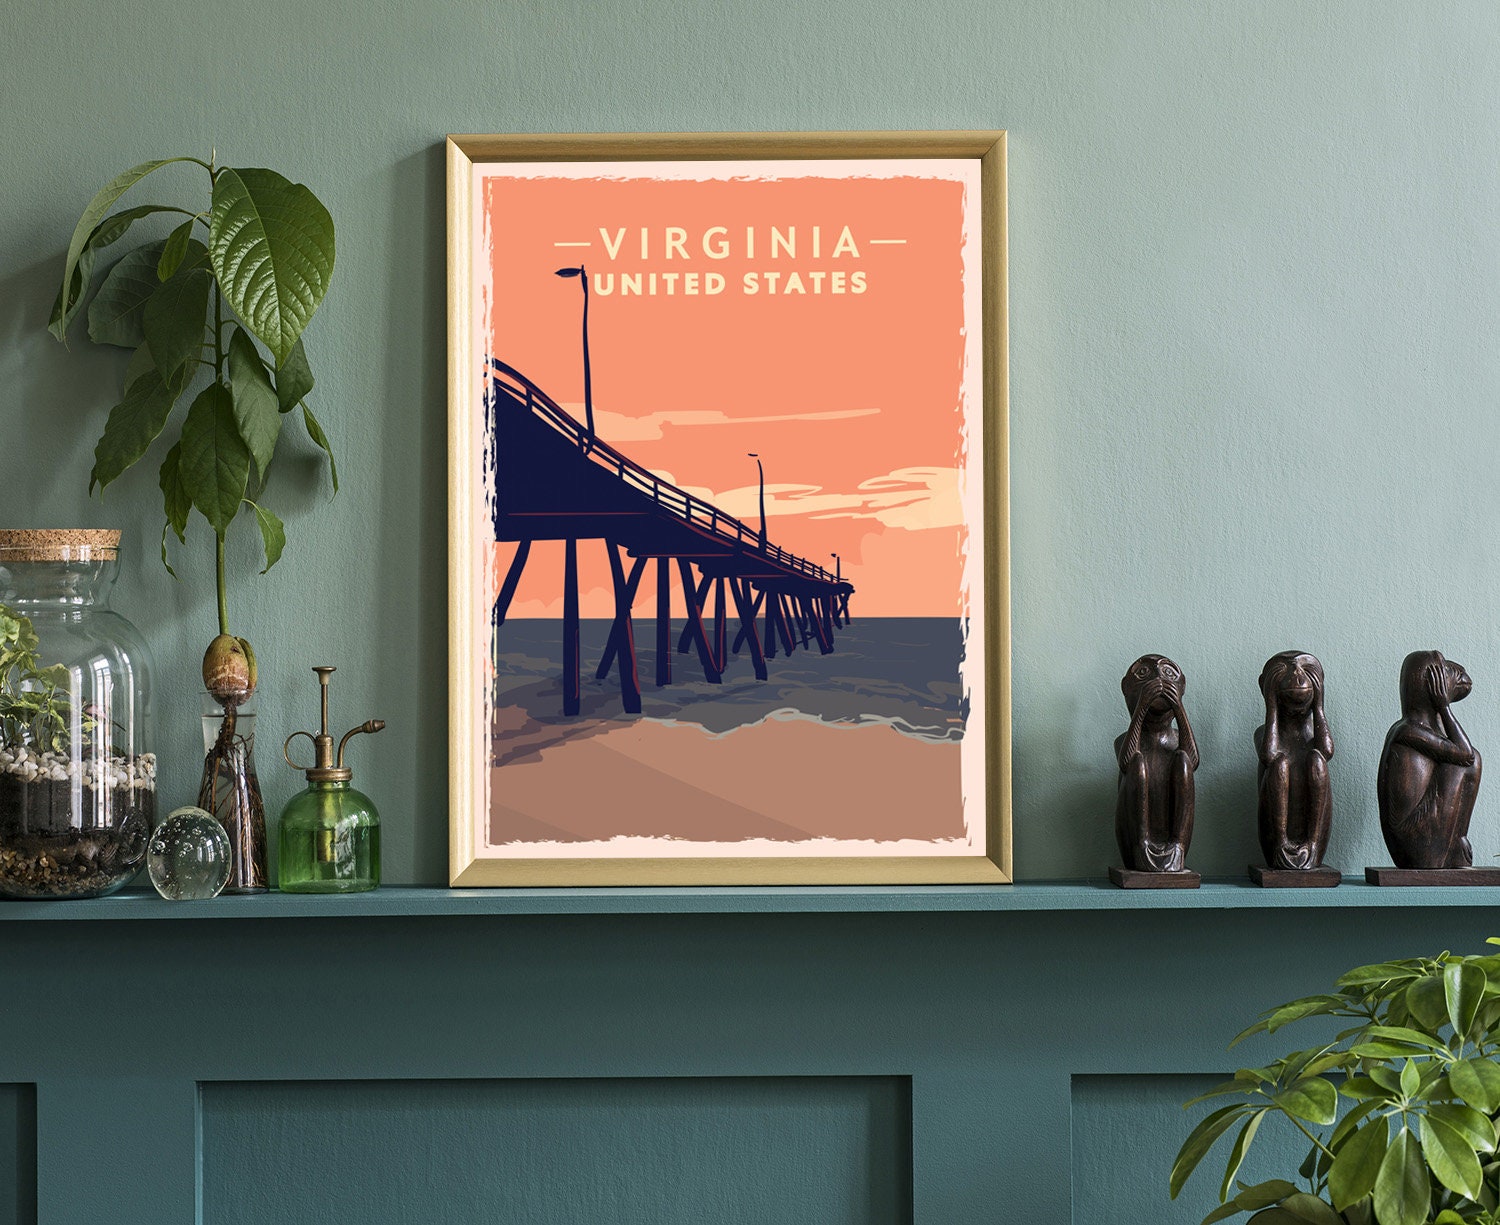 Retro Style Travel Poster, Virginia Vintage Rustic Poster Print, Home Wall Art, Office Wall Decor, Poster Prints, Virginia, State Map Poster